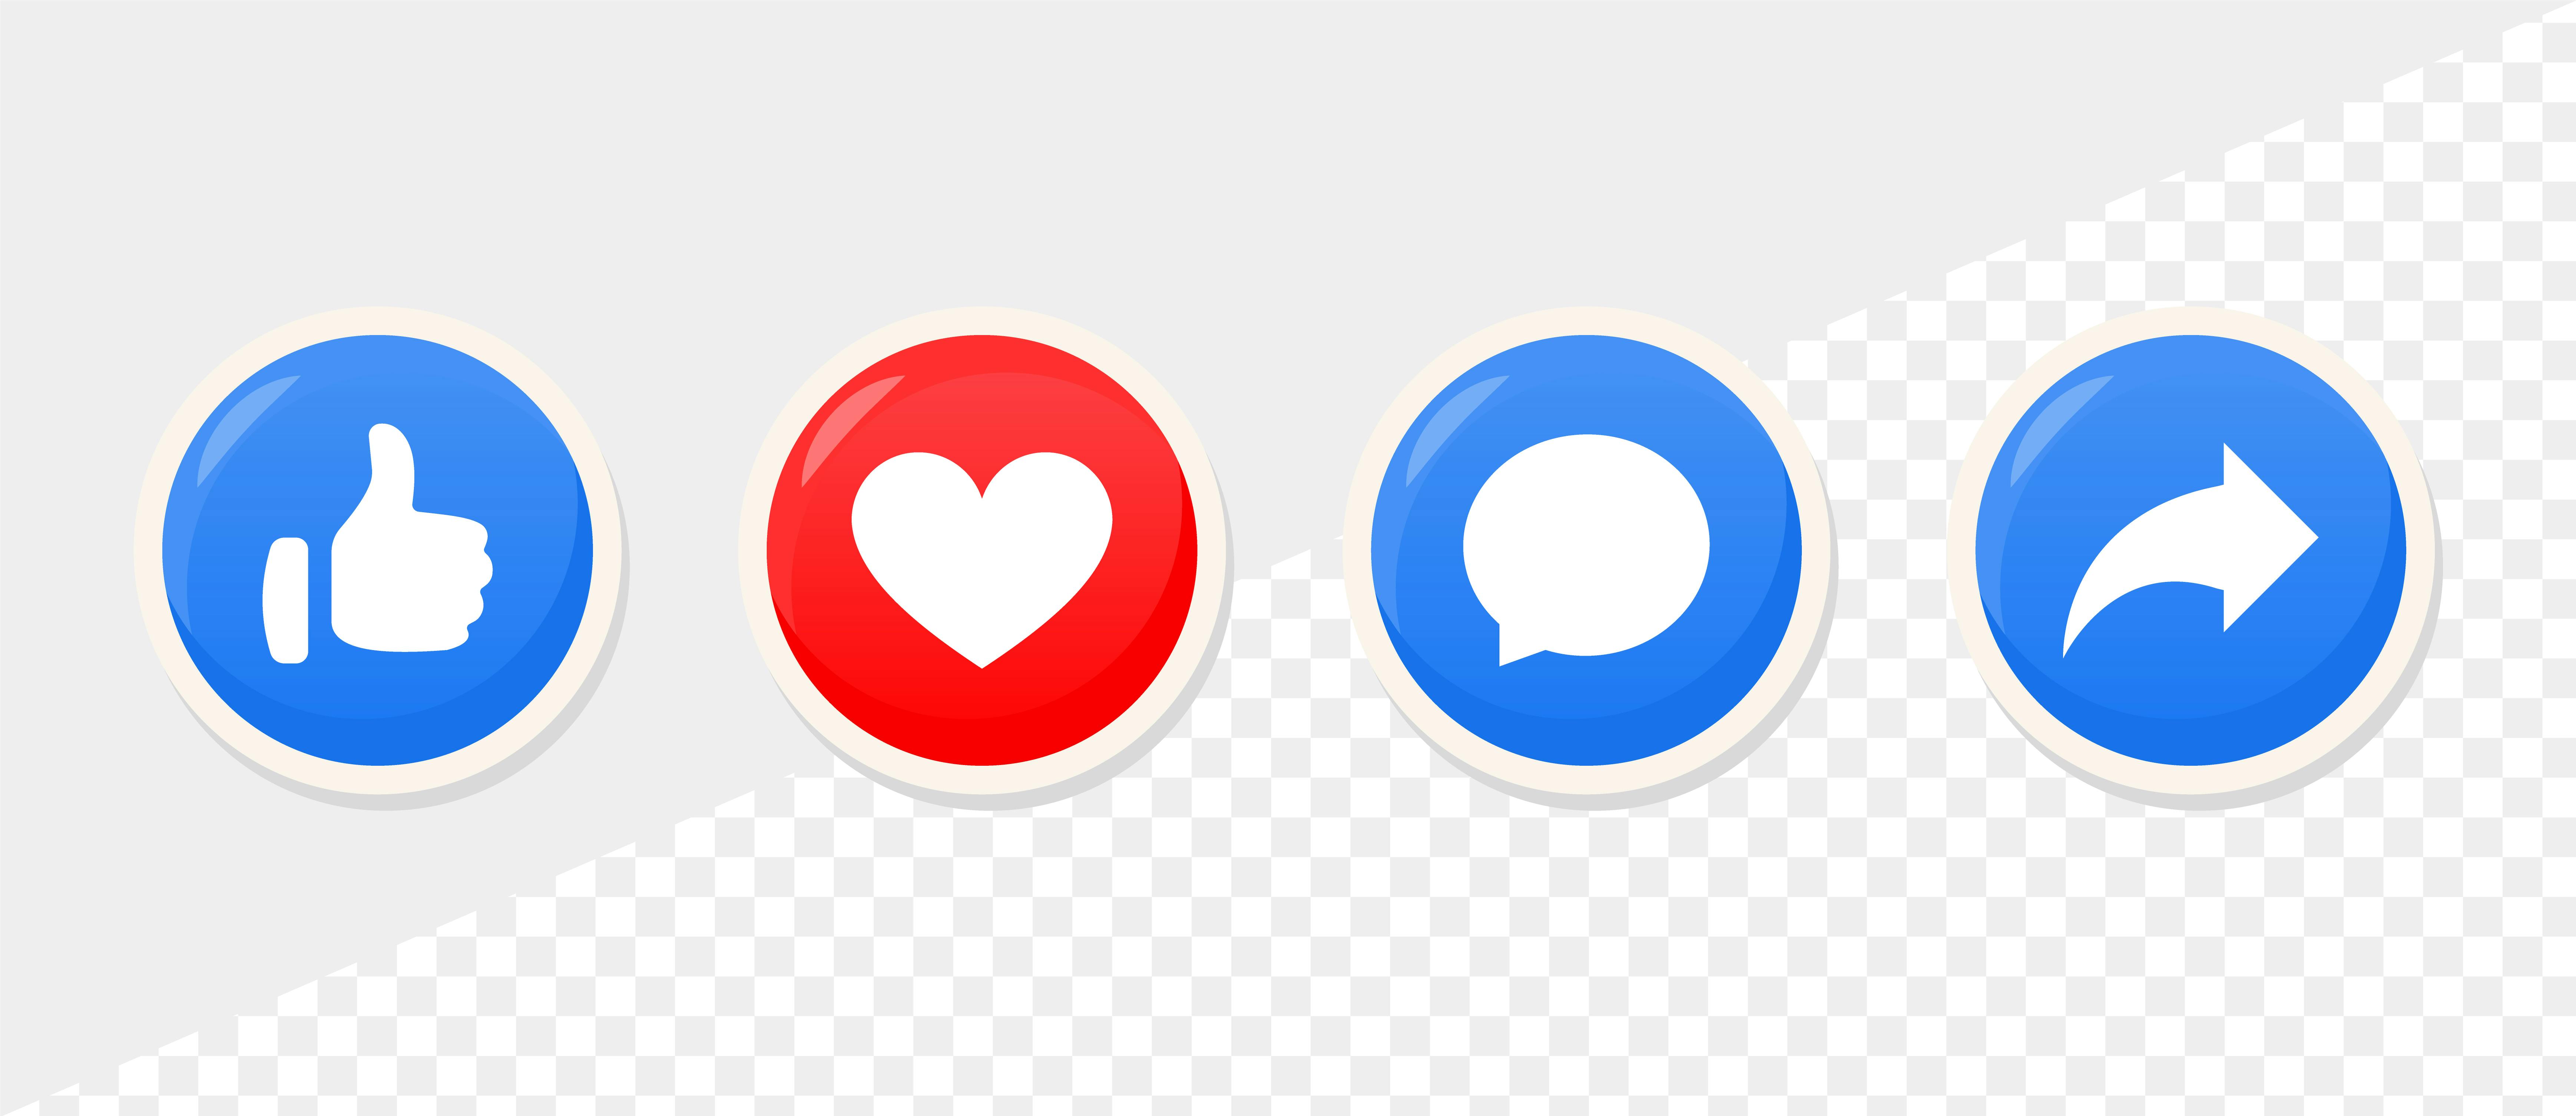 like_love_comment_share_icons_button.jpg